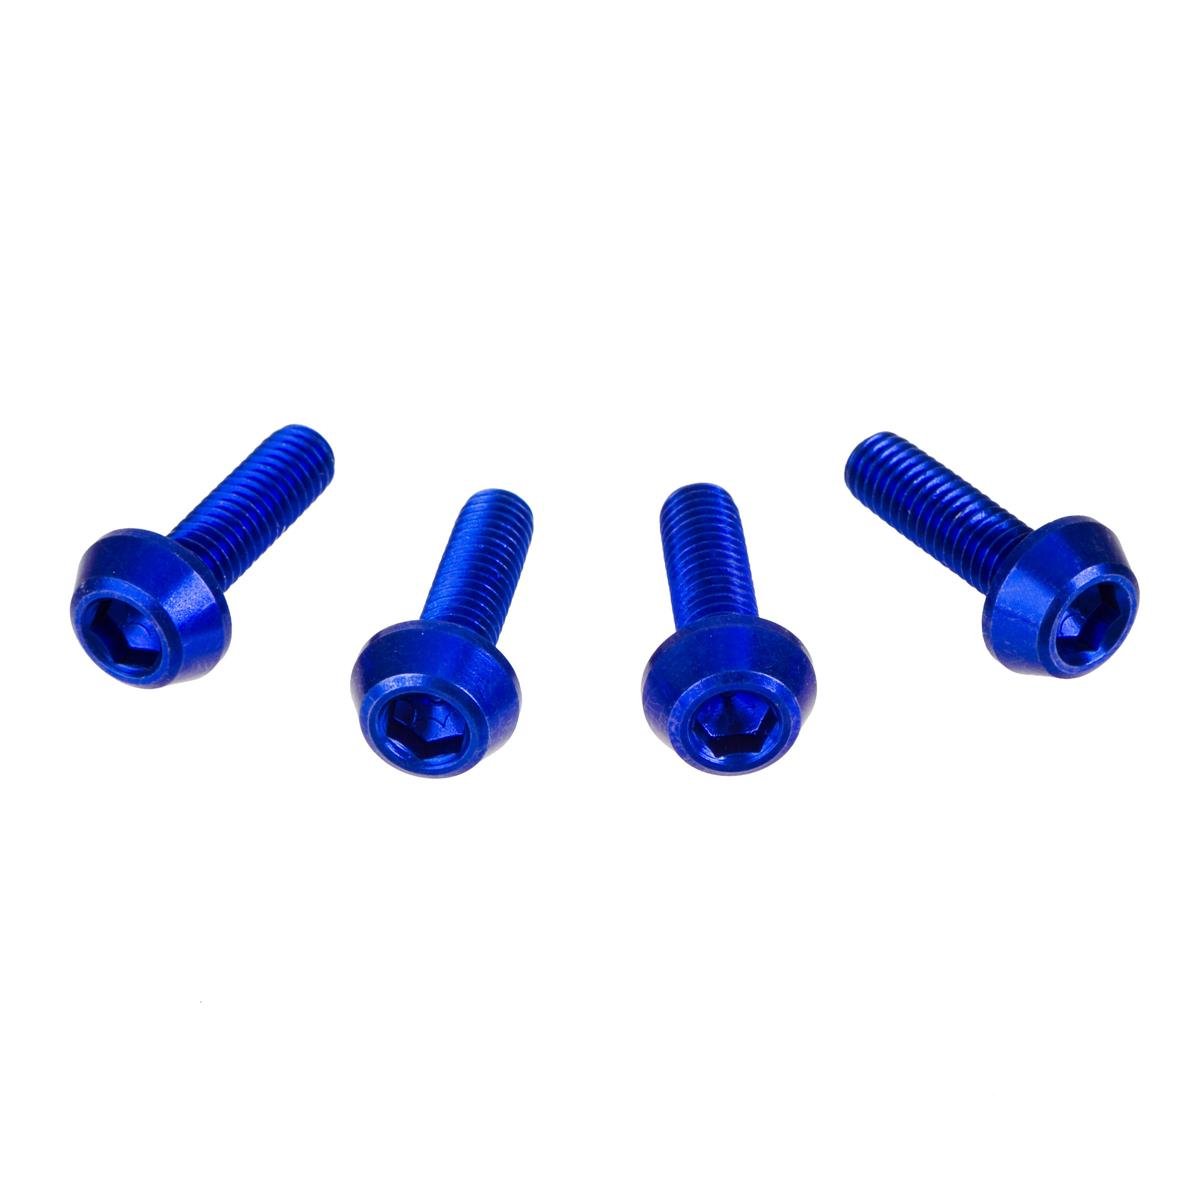 DRC Inner Hex Bolts  M6 x 20 mm, Blue, Pack of 4